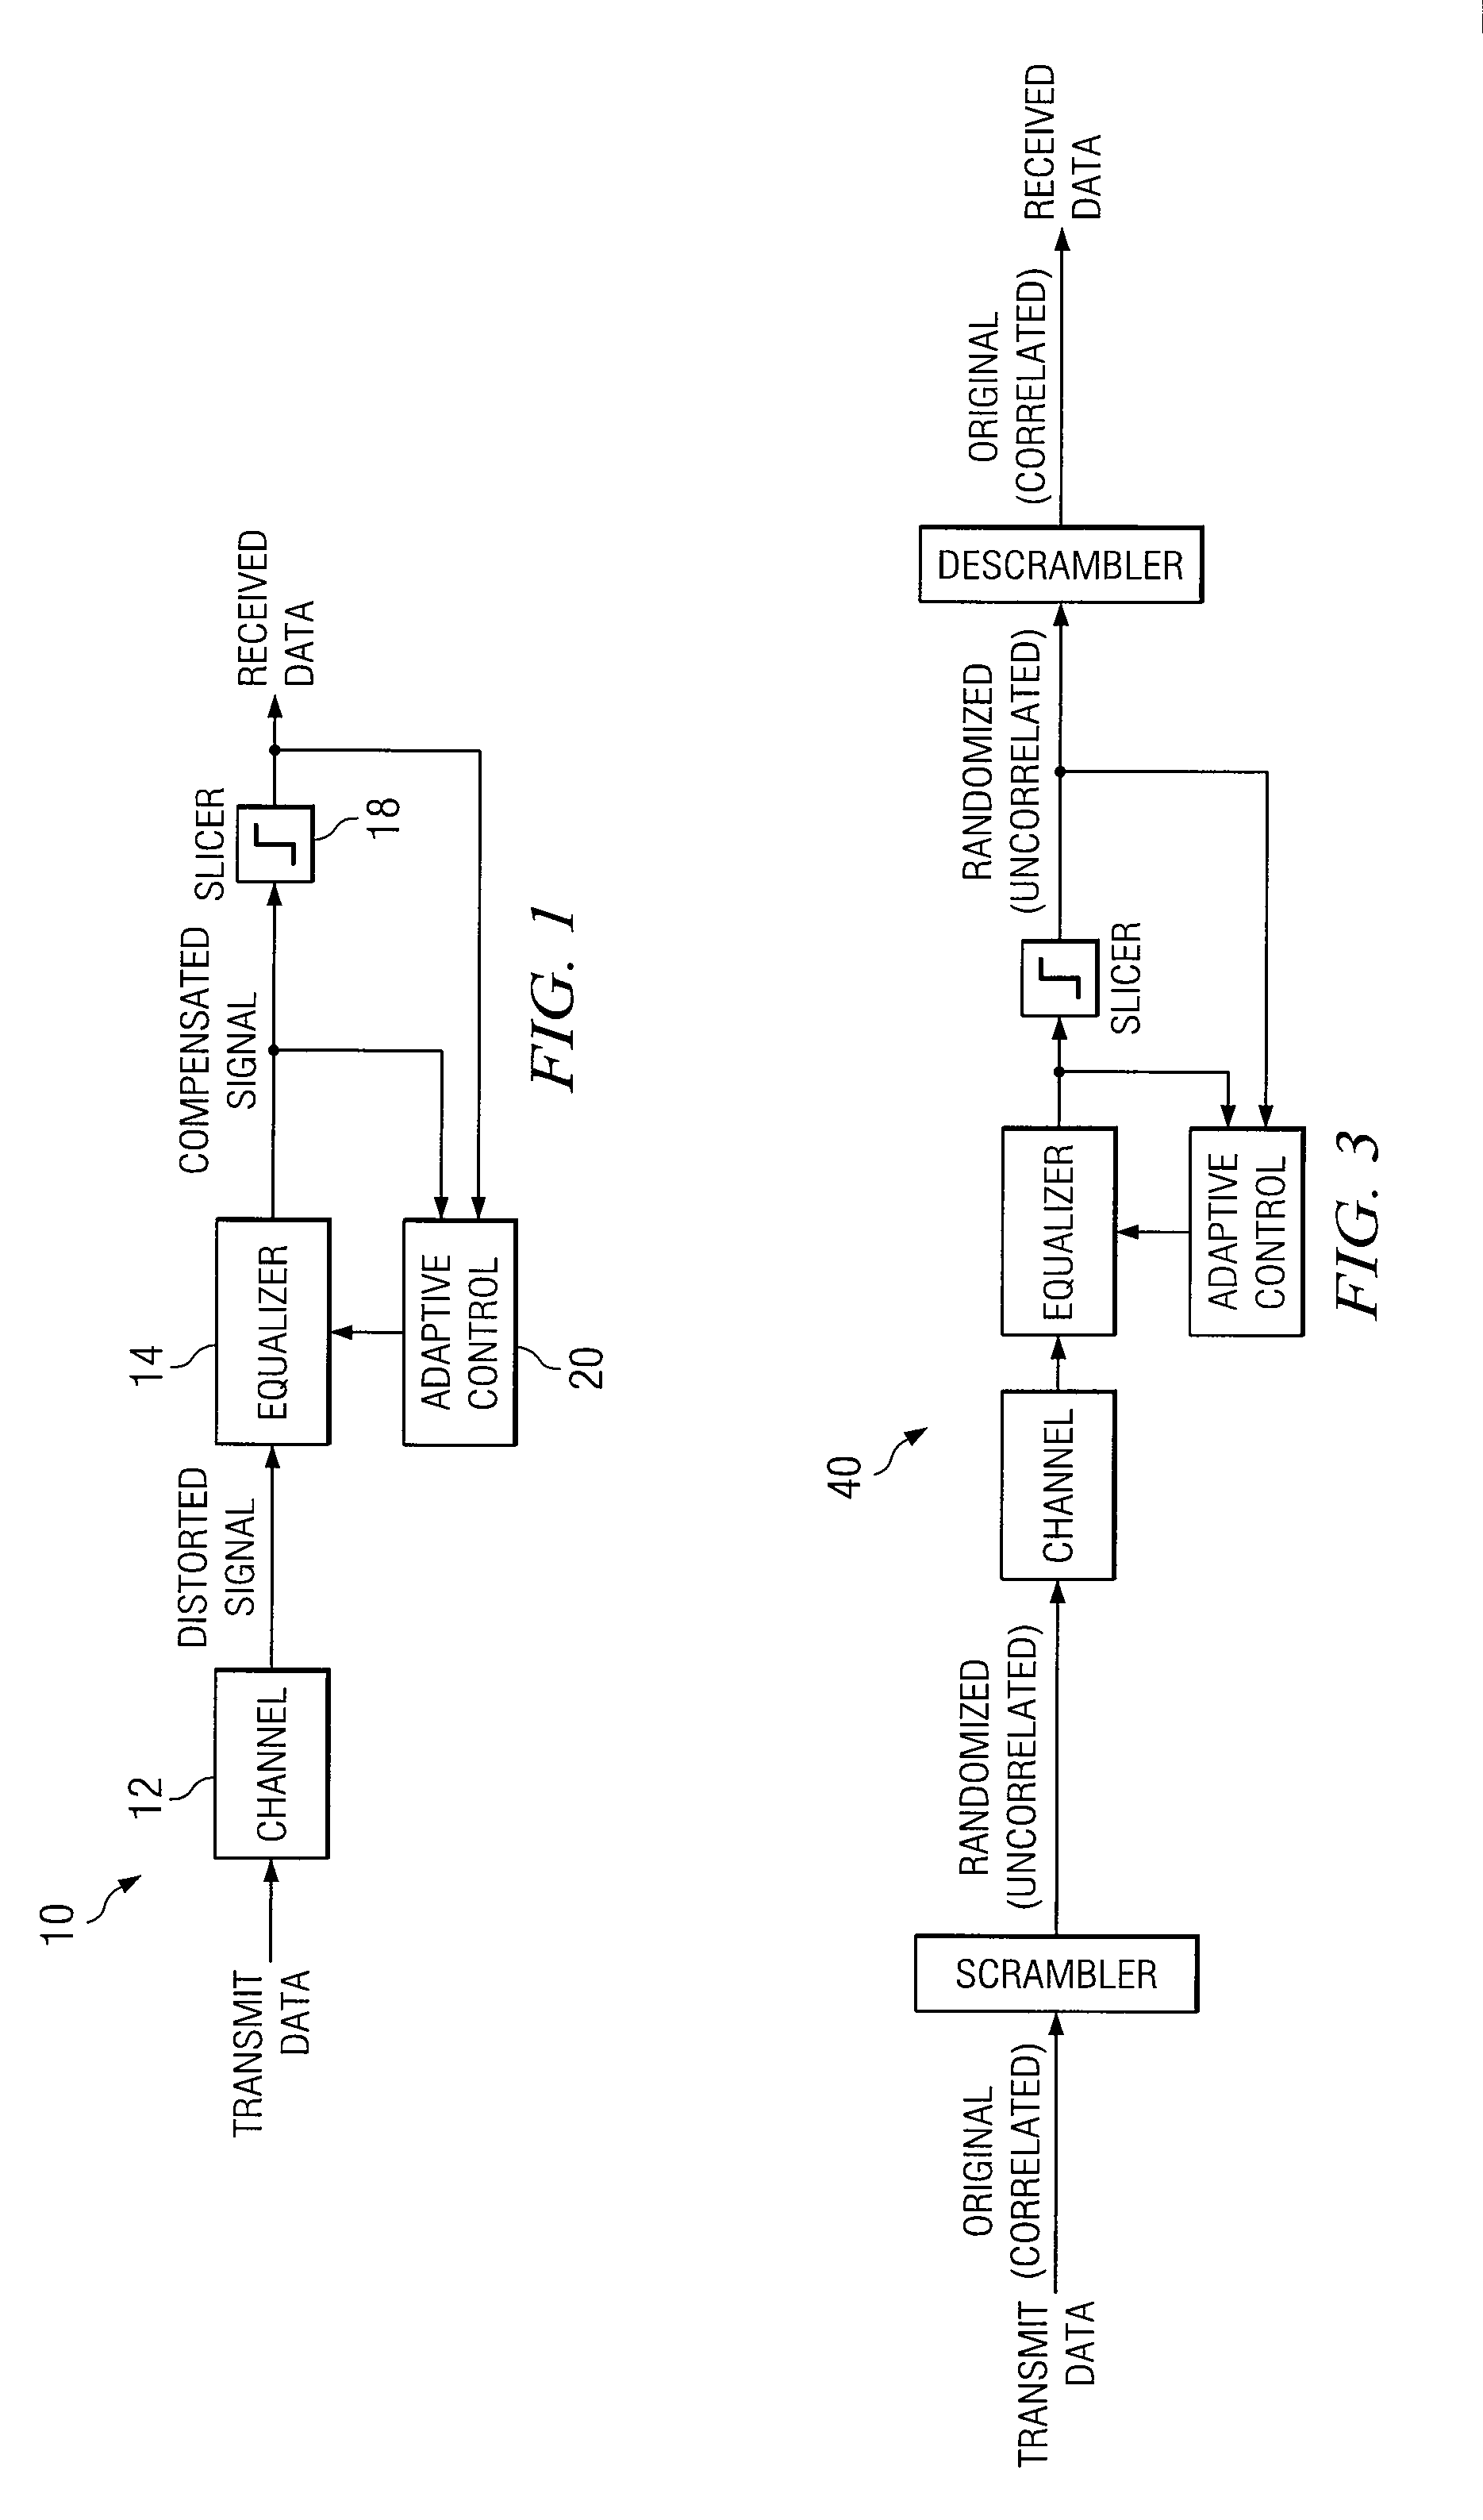 Method and System for Static Data-Pattern Compensated Adaptive Equalizer Control